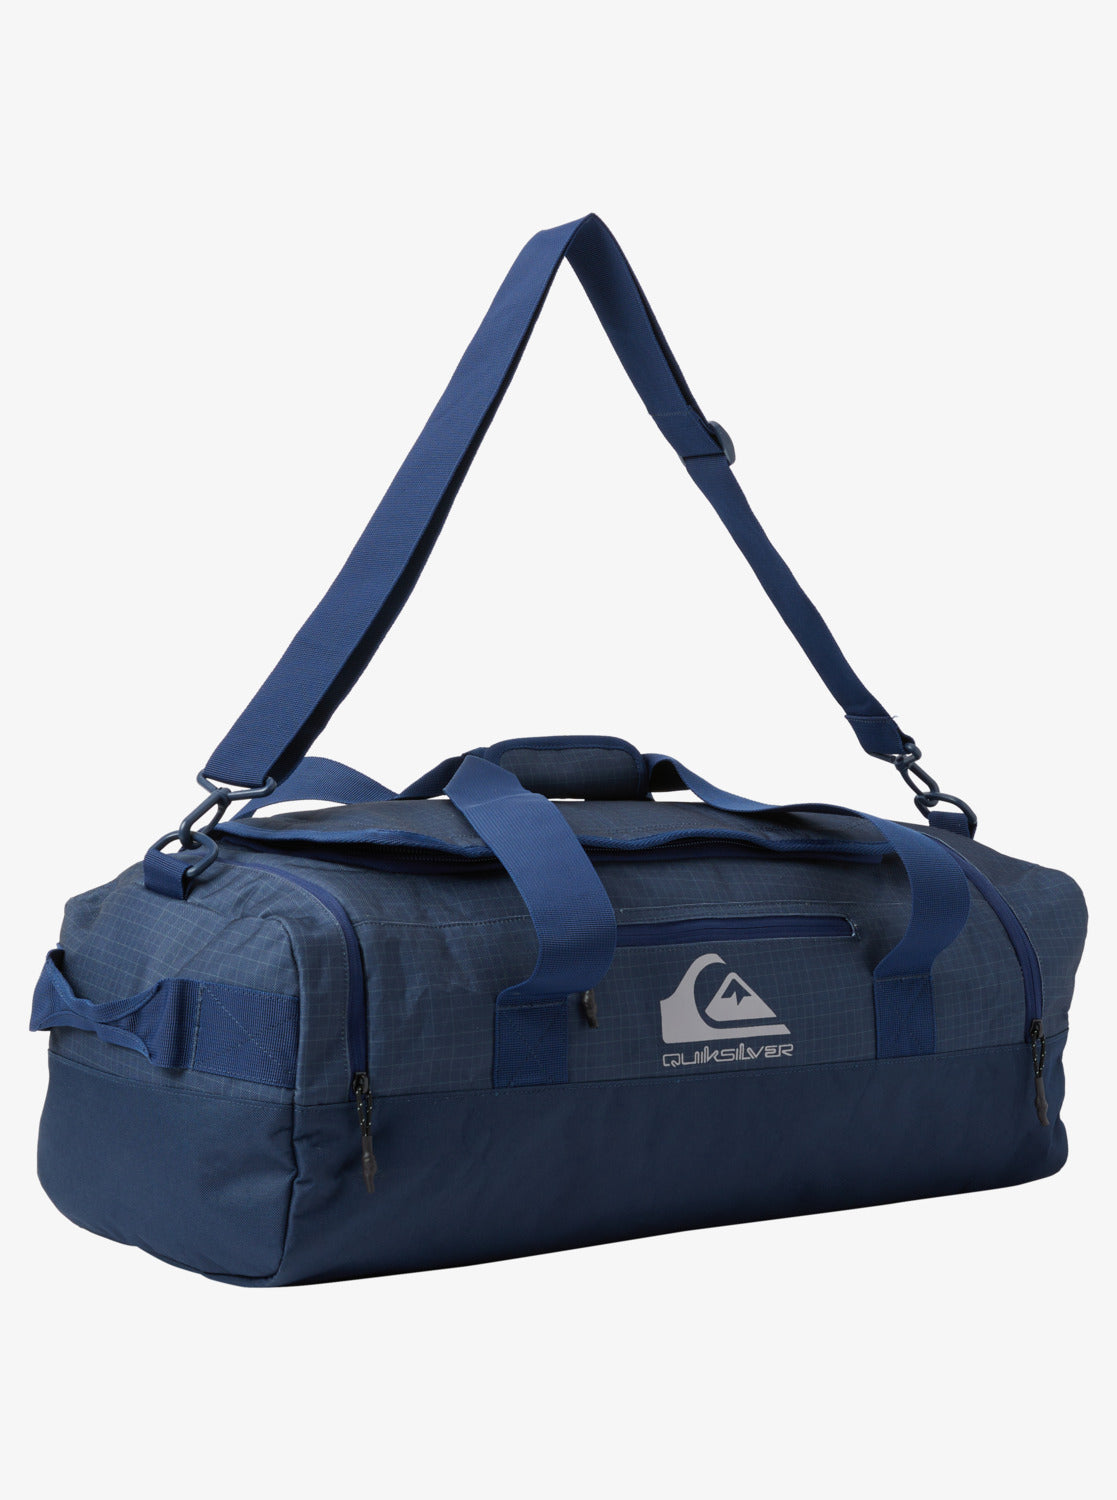 Quiksilver Shelter Duffle Bag in naval academy blue colourway from angle shot